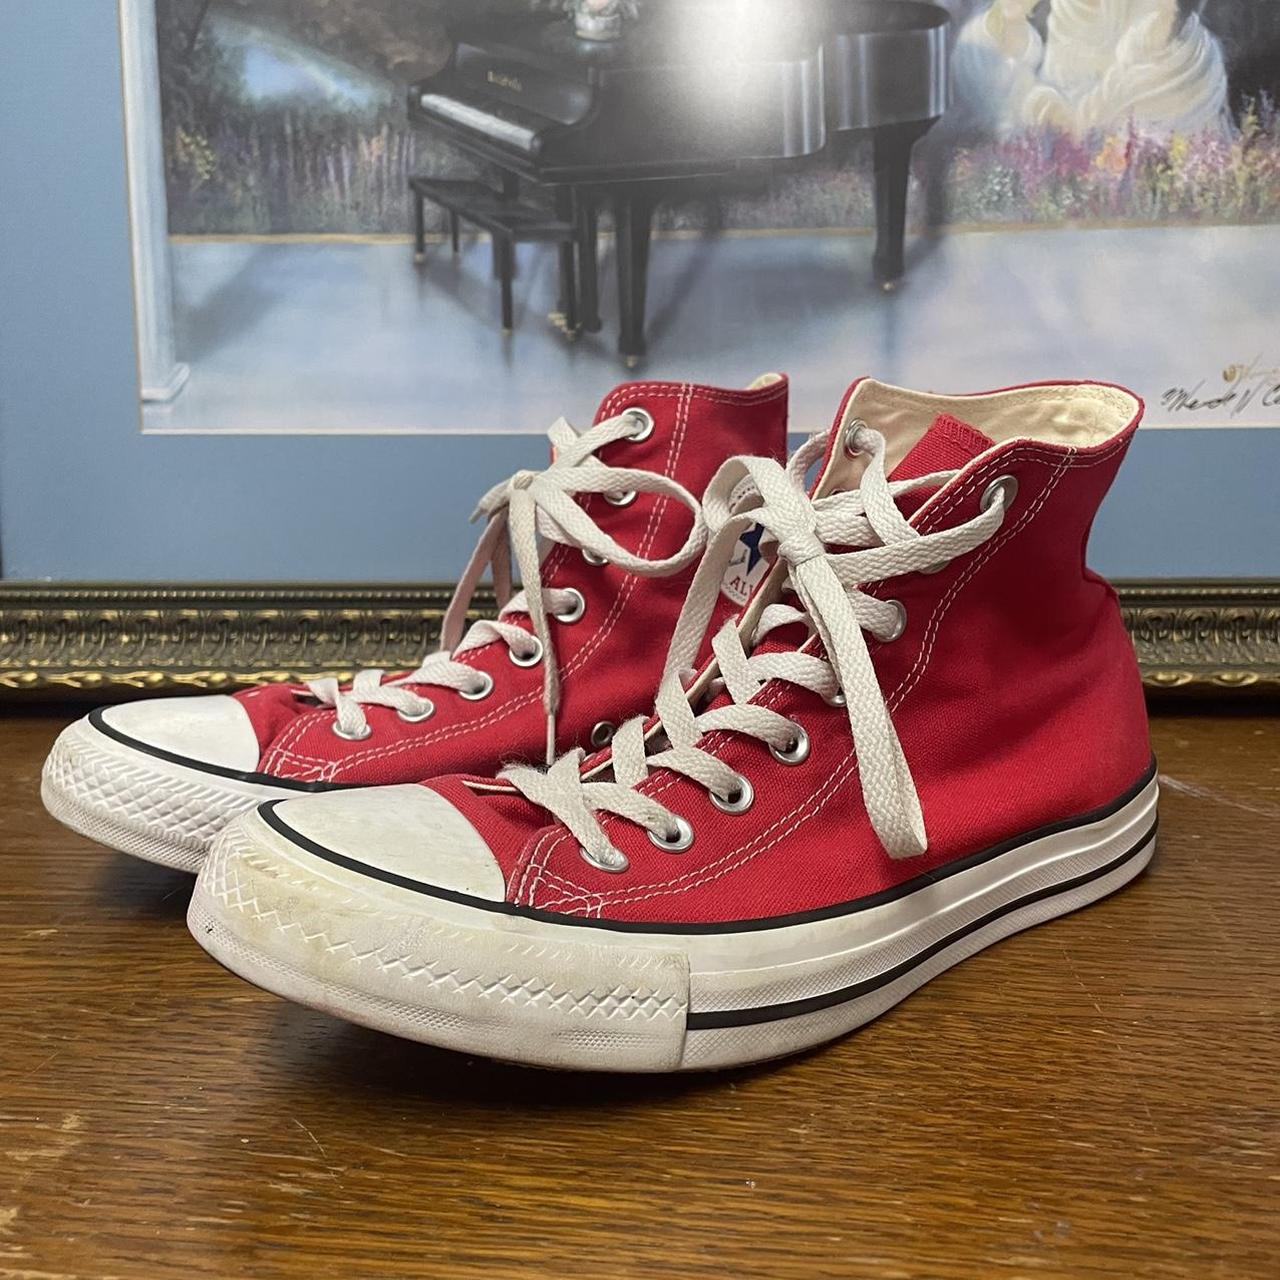 Converse Men's Red and White Trainers | Depop